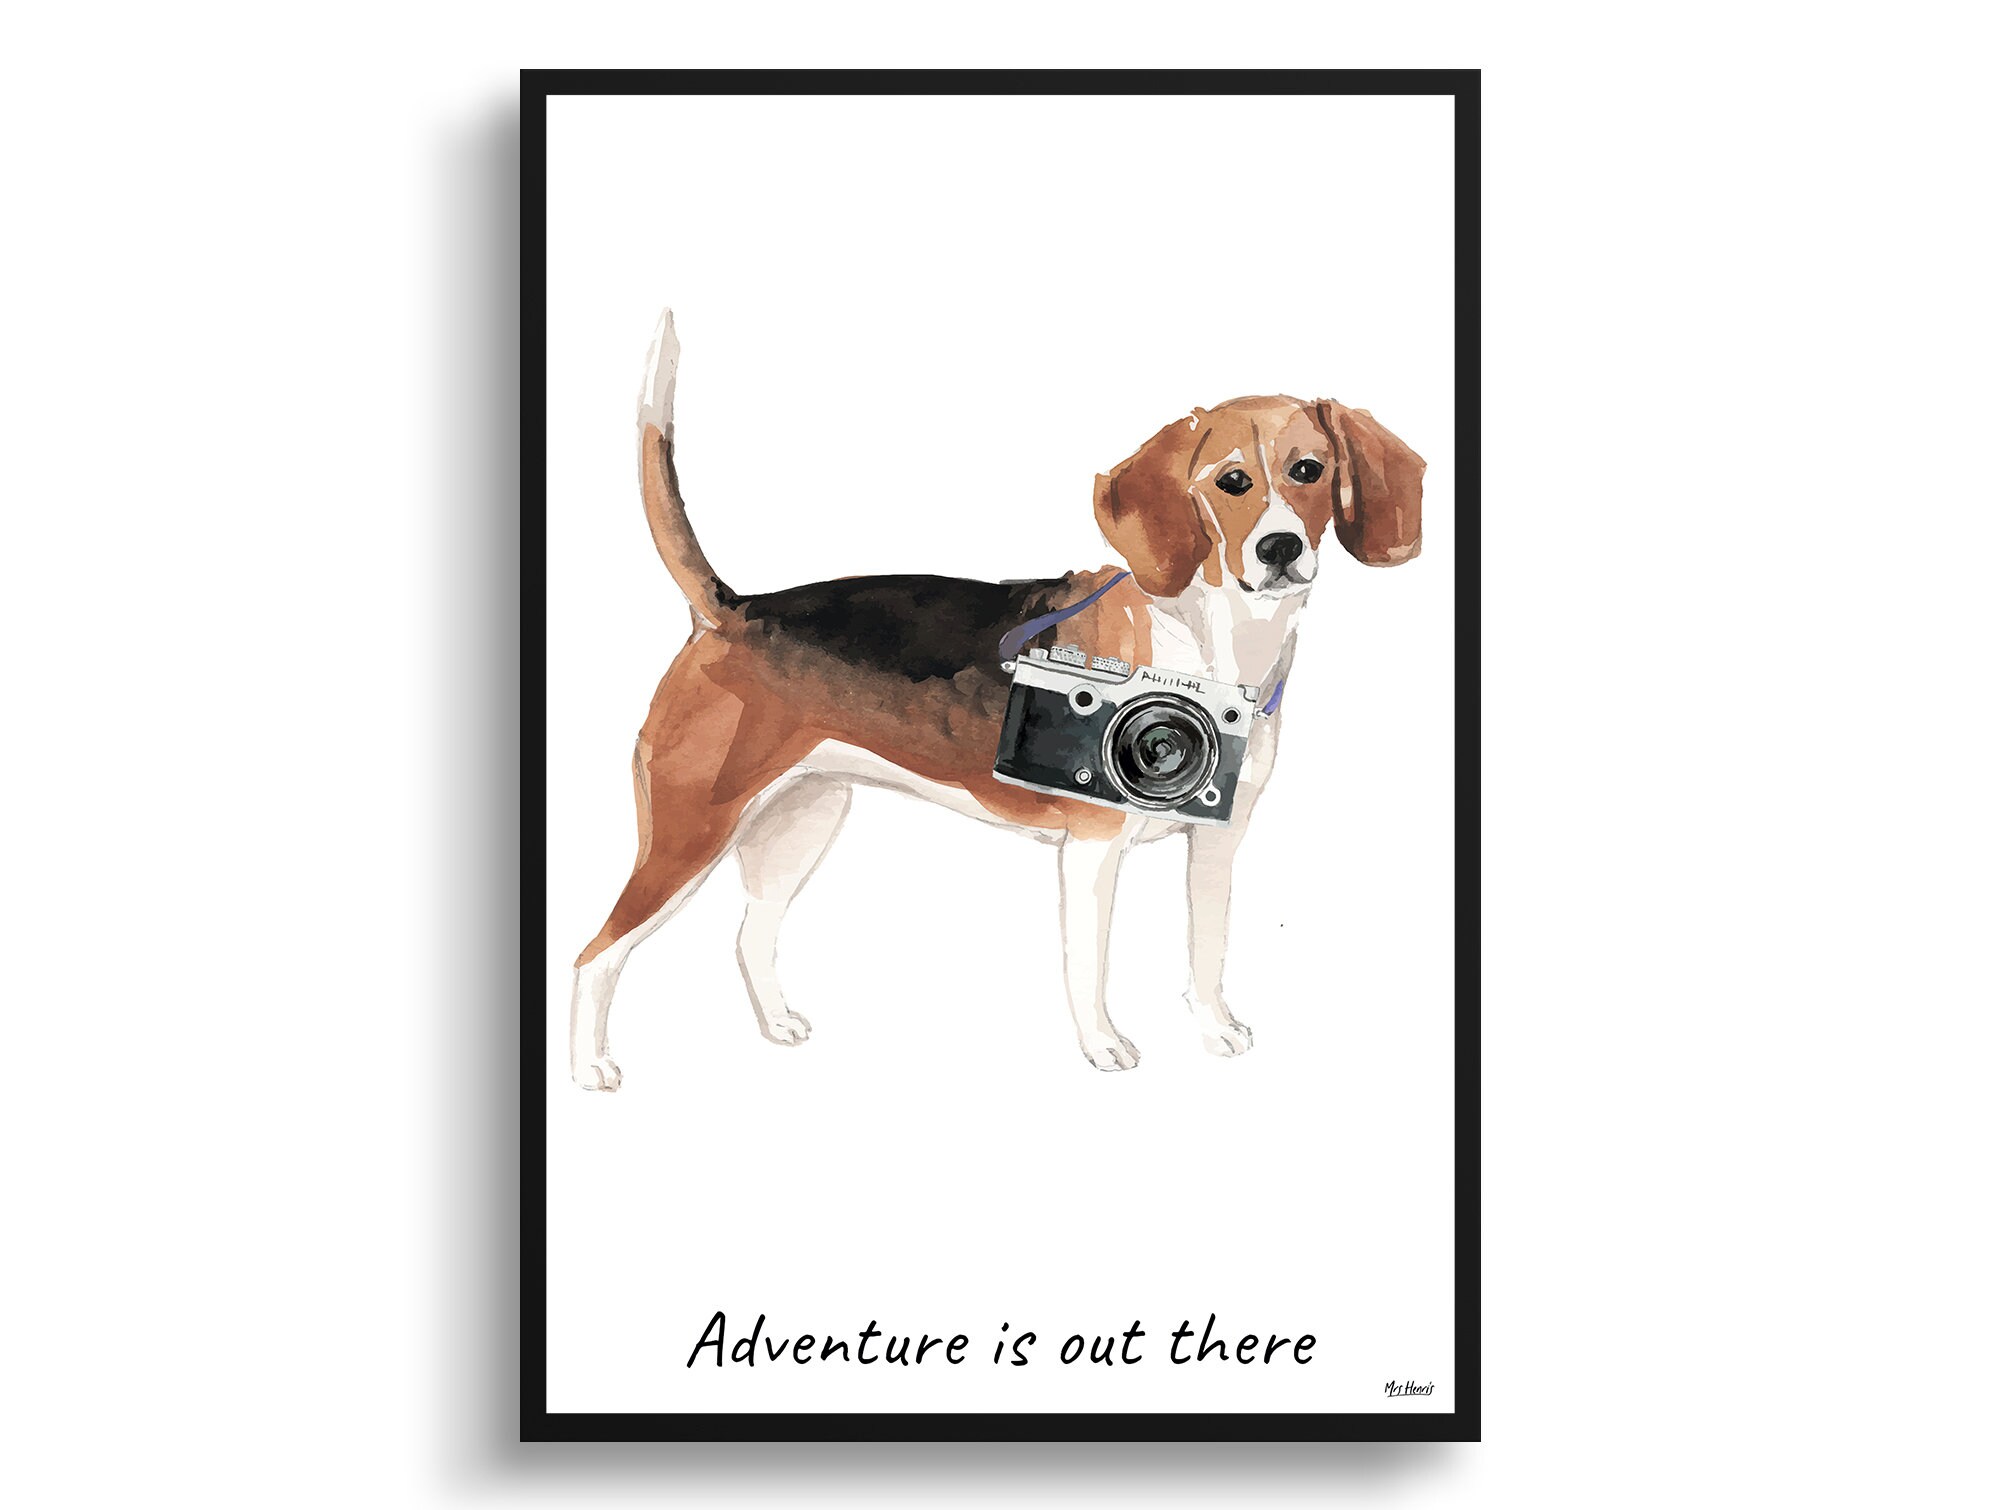 Adventure Is Out There Beagle Dog Print Illustration. Framed & Un-Framed Wall Art Options. Personalised Name